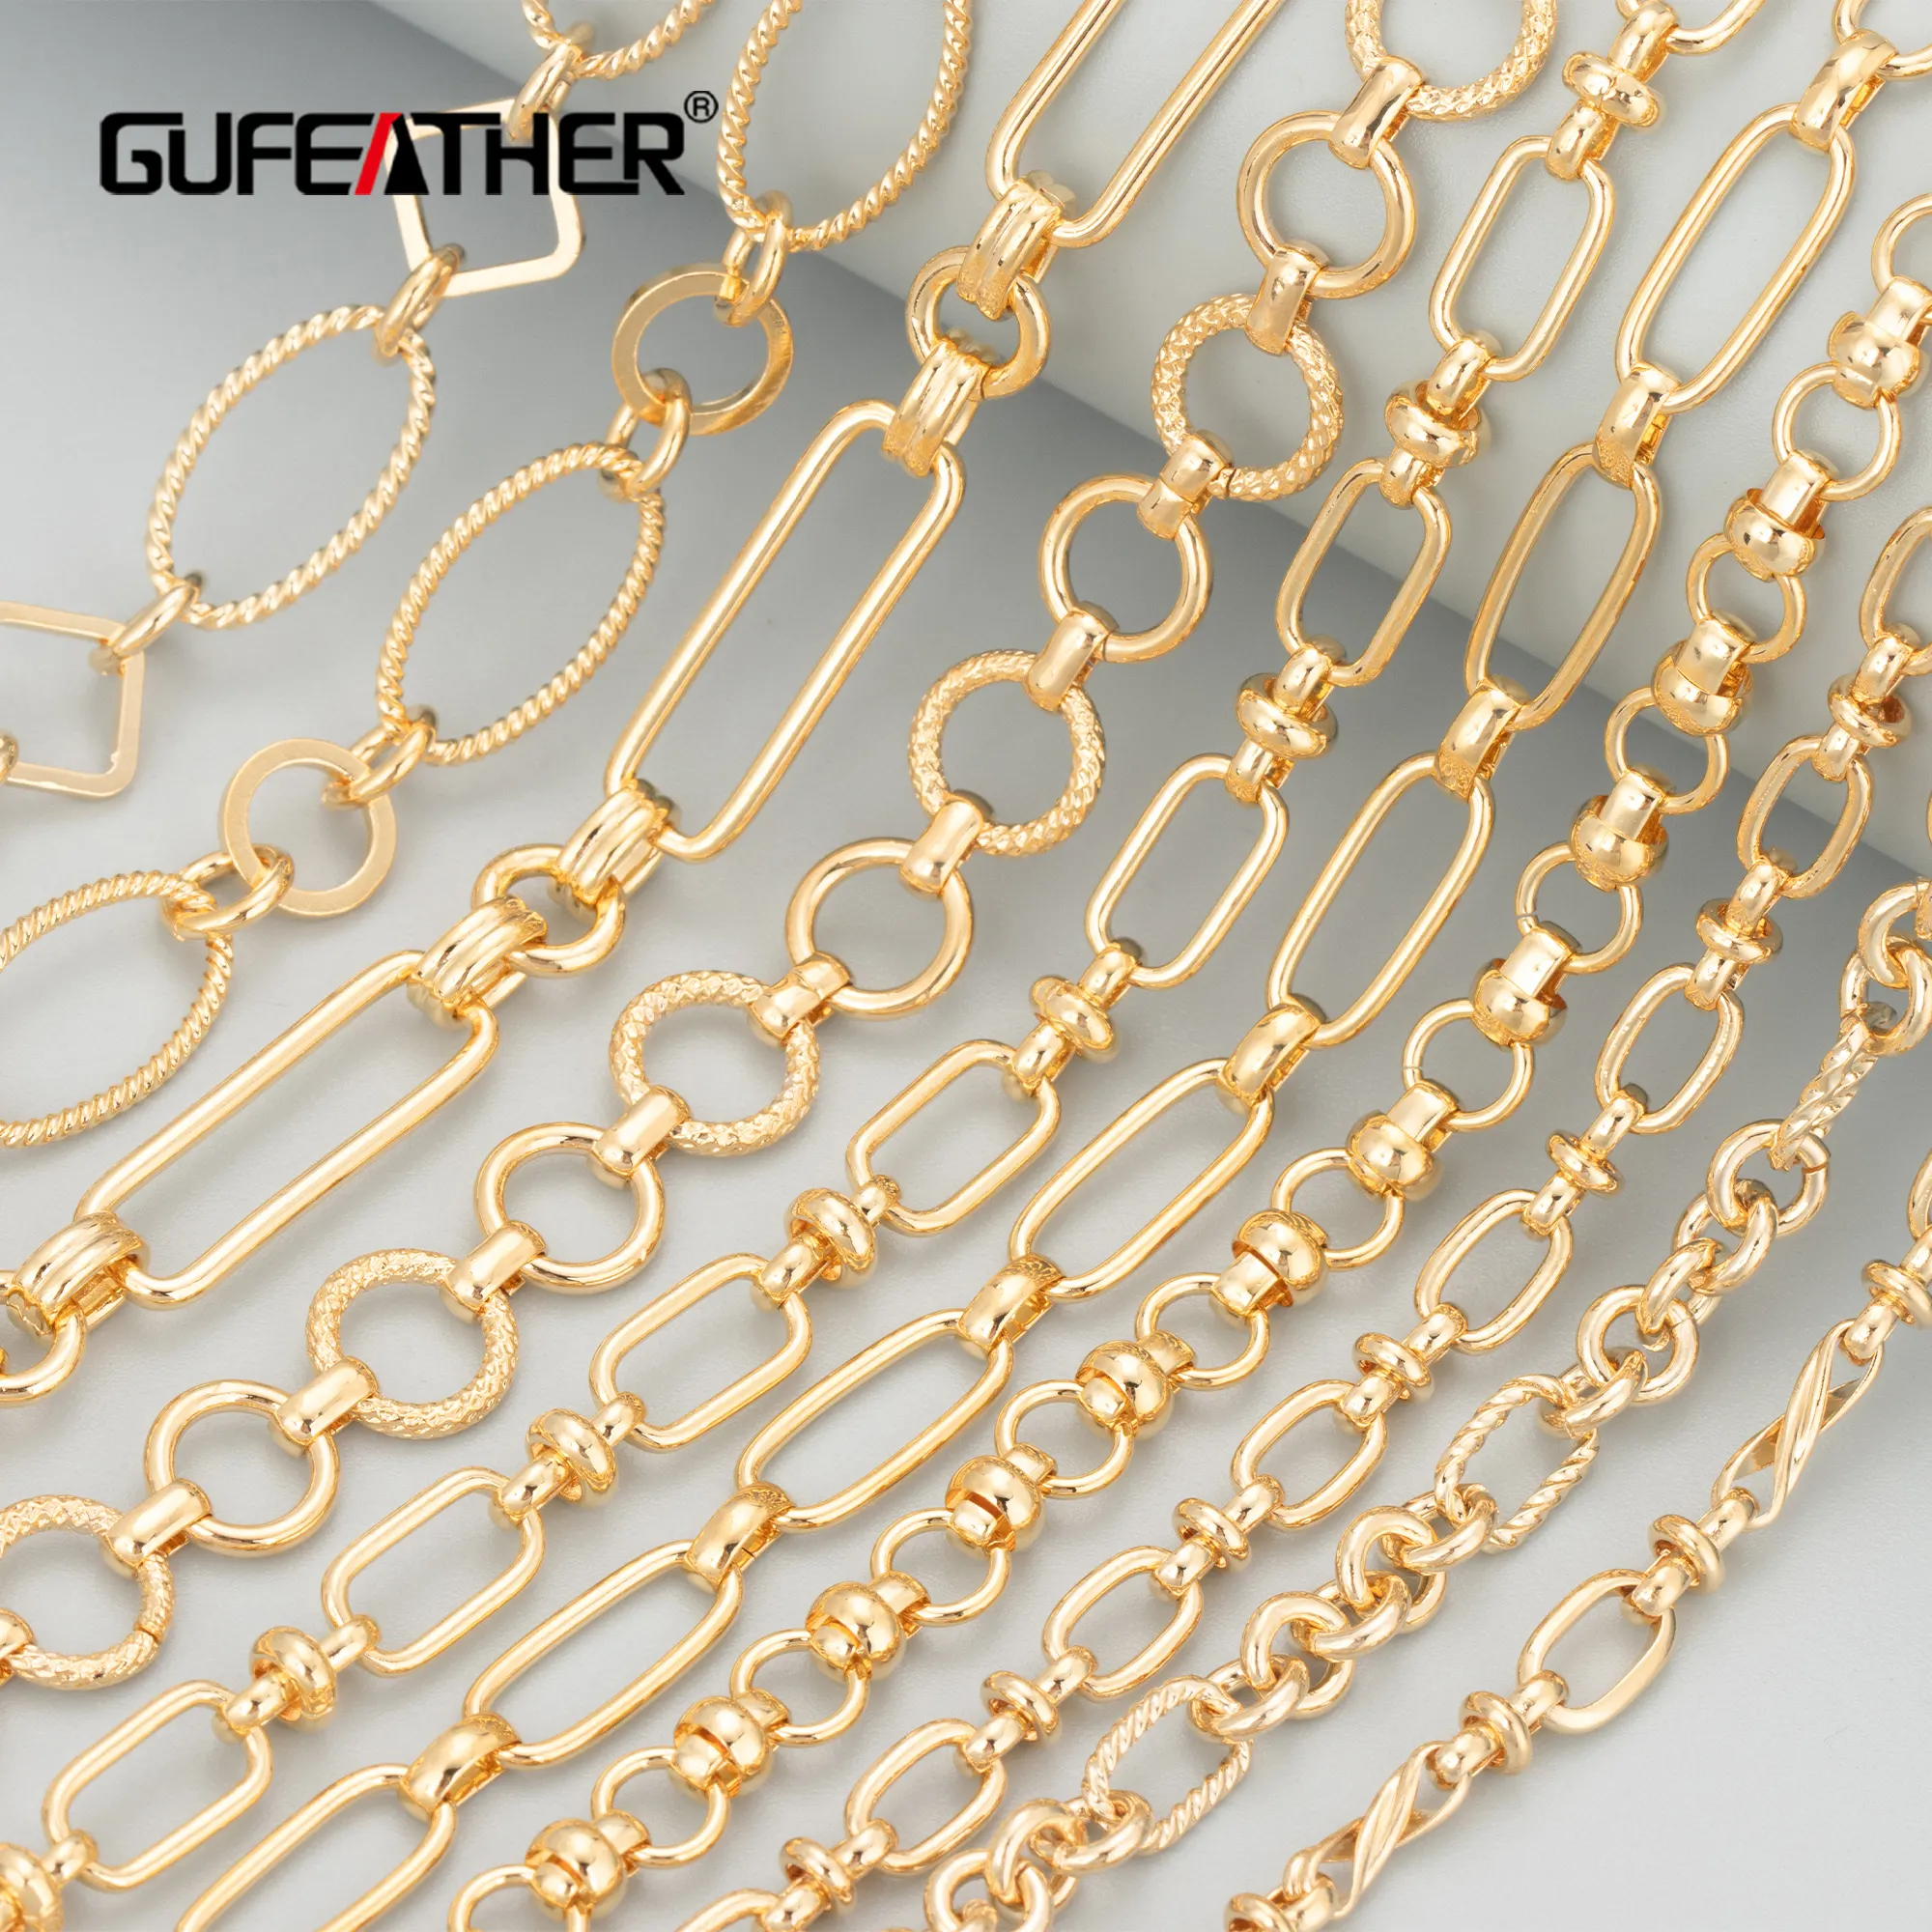 C54 diy chain,jewelry accessories,pass REACH,nickel free,18k gold plated,copper,necklace making,1m/lot